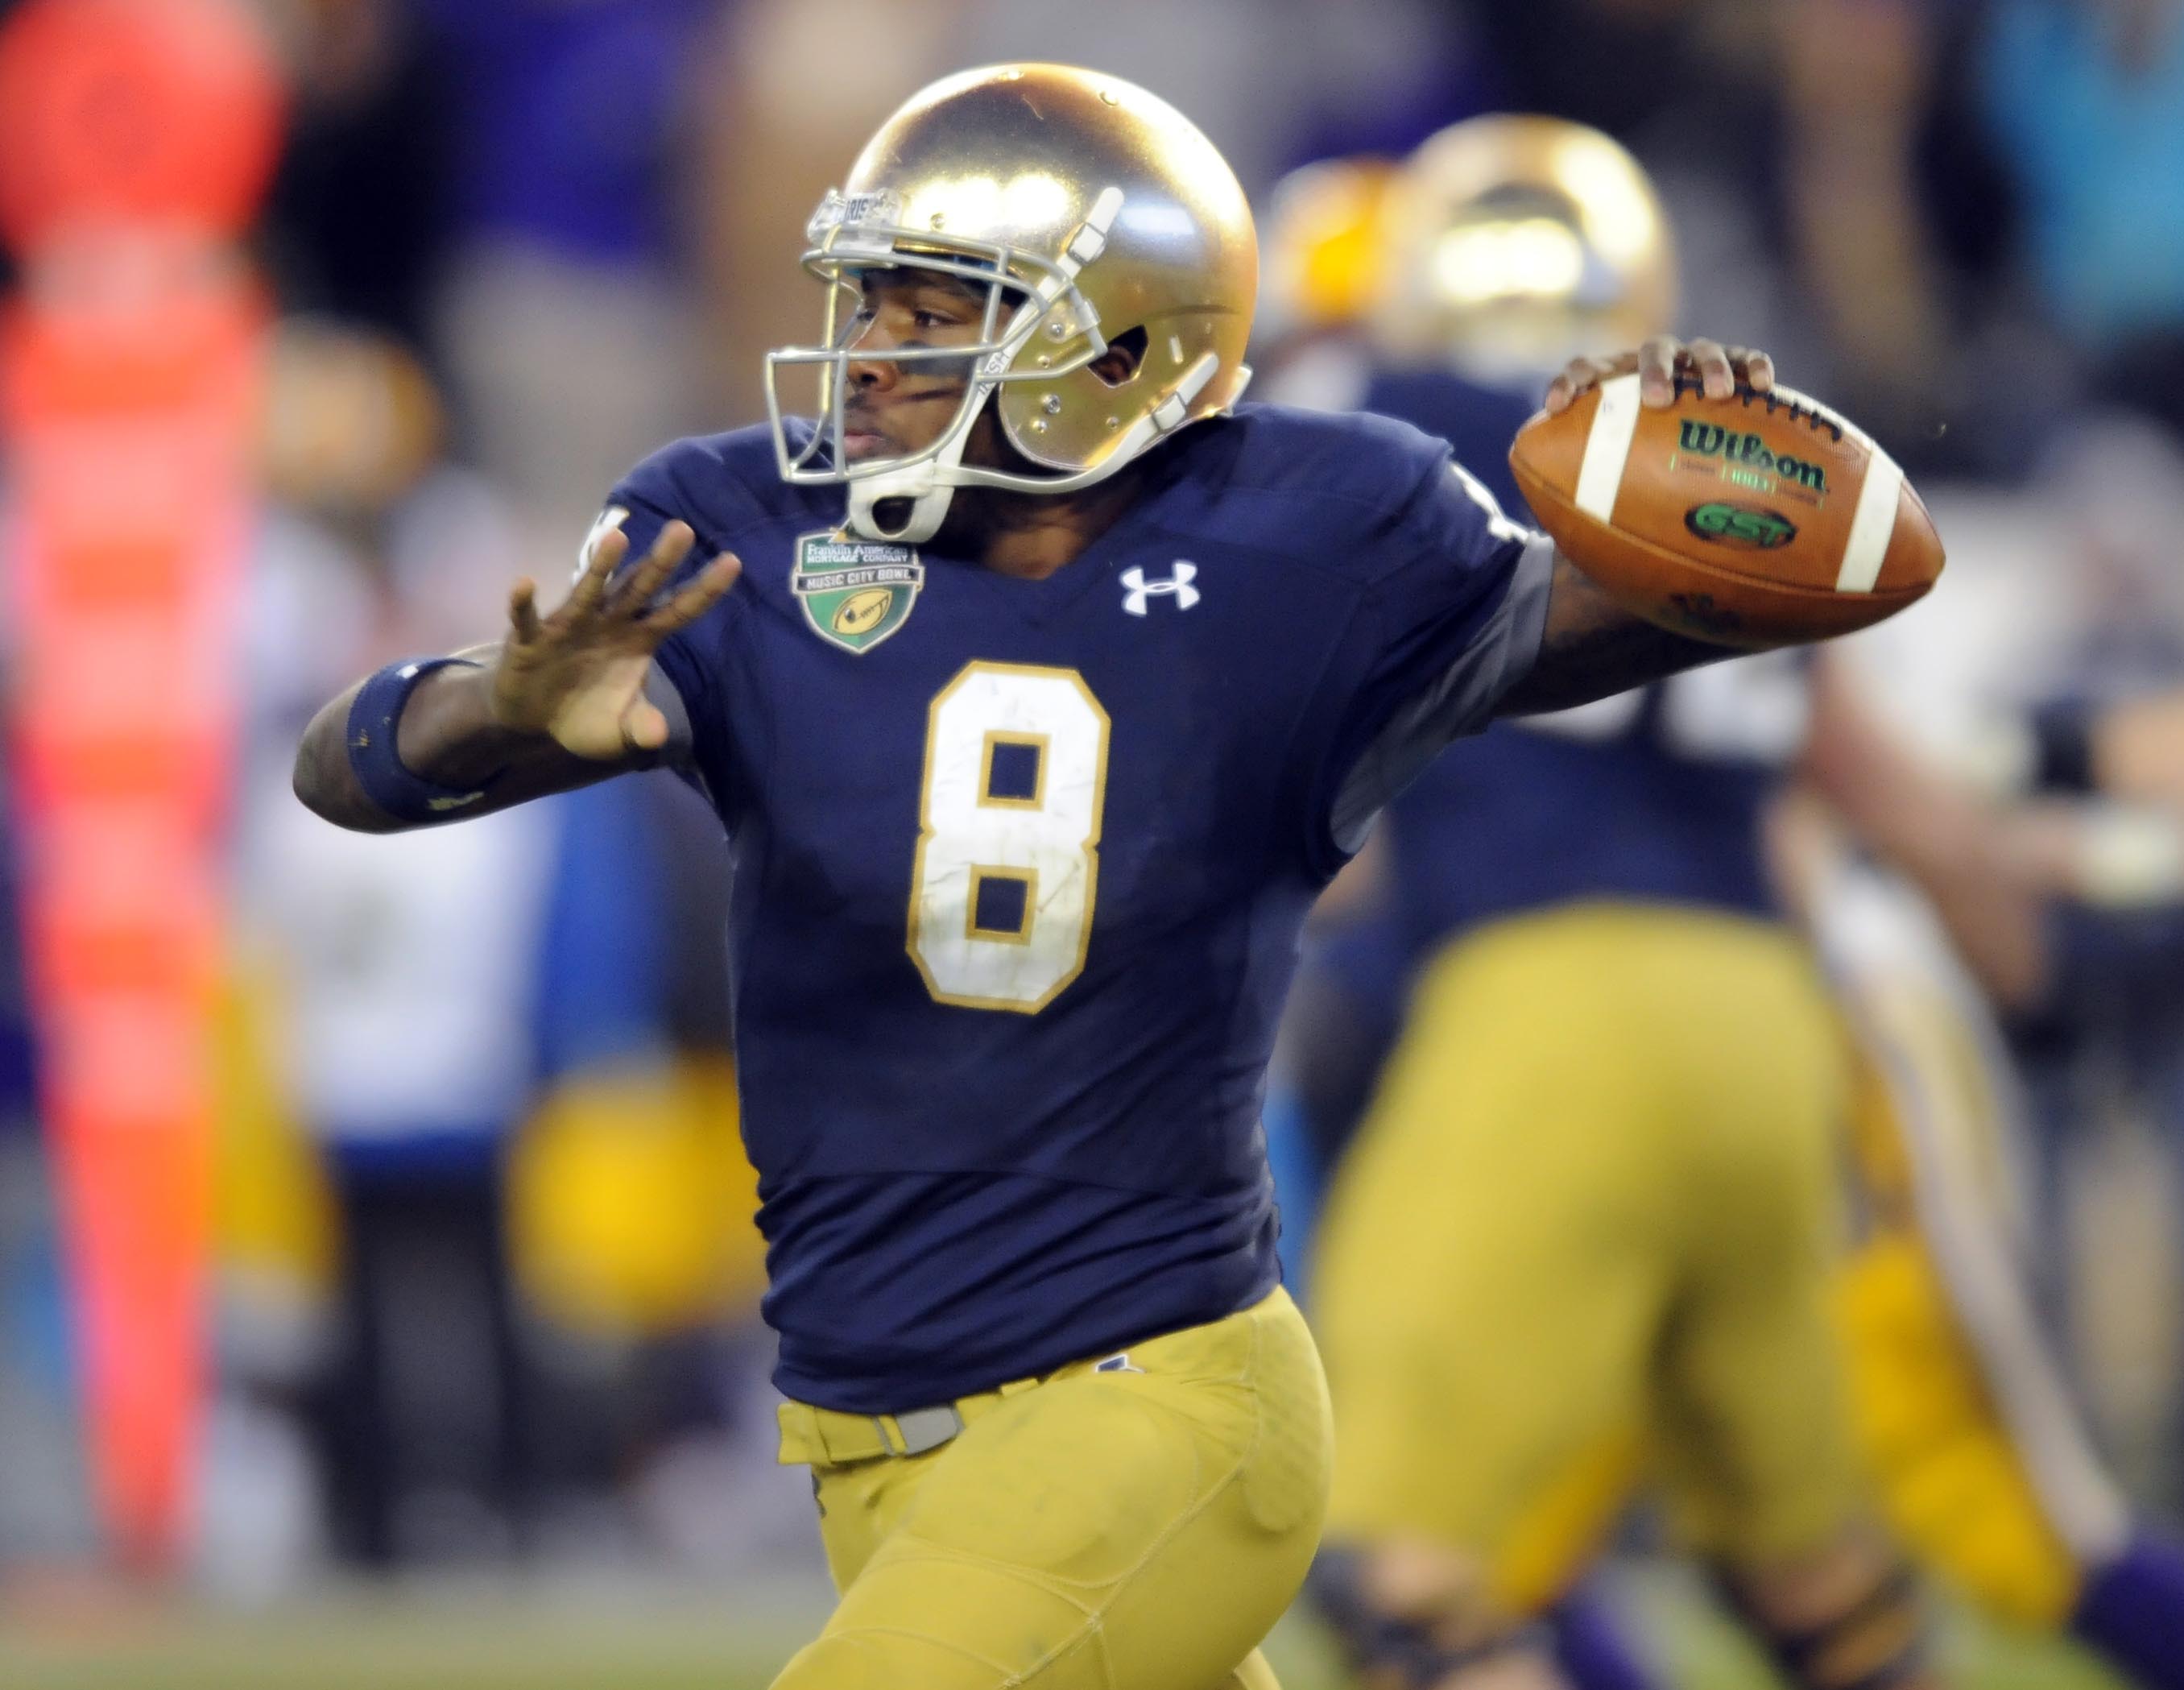 Dec 30, 2014; Nashville, TN, USA; Notre Dame Fighting Irish quarterback Malik Zaire (8) passes during the second half against the LSU Tigers in the Music City Bowl at LP Field. Notre Dame won 31-28. (Christopher Hanewinckel-USA TODAY Sports)